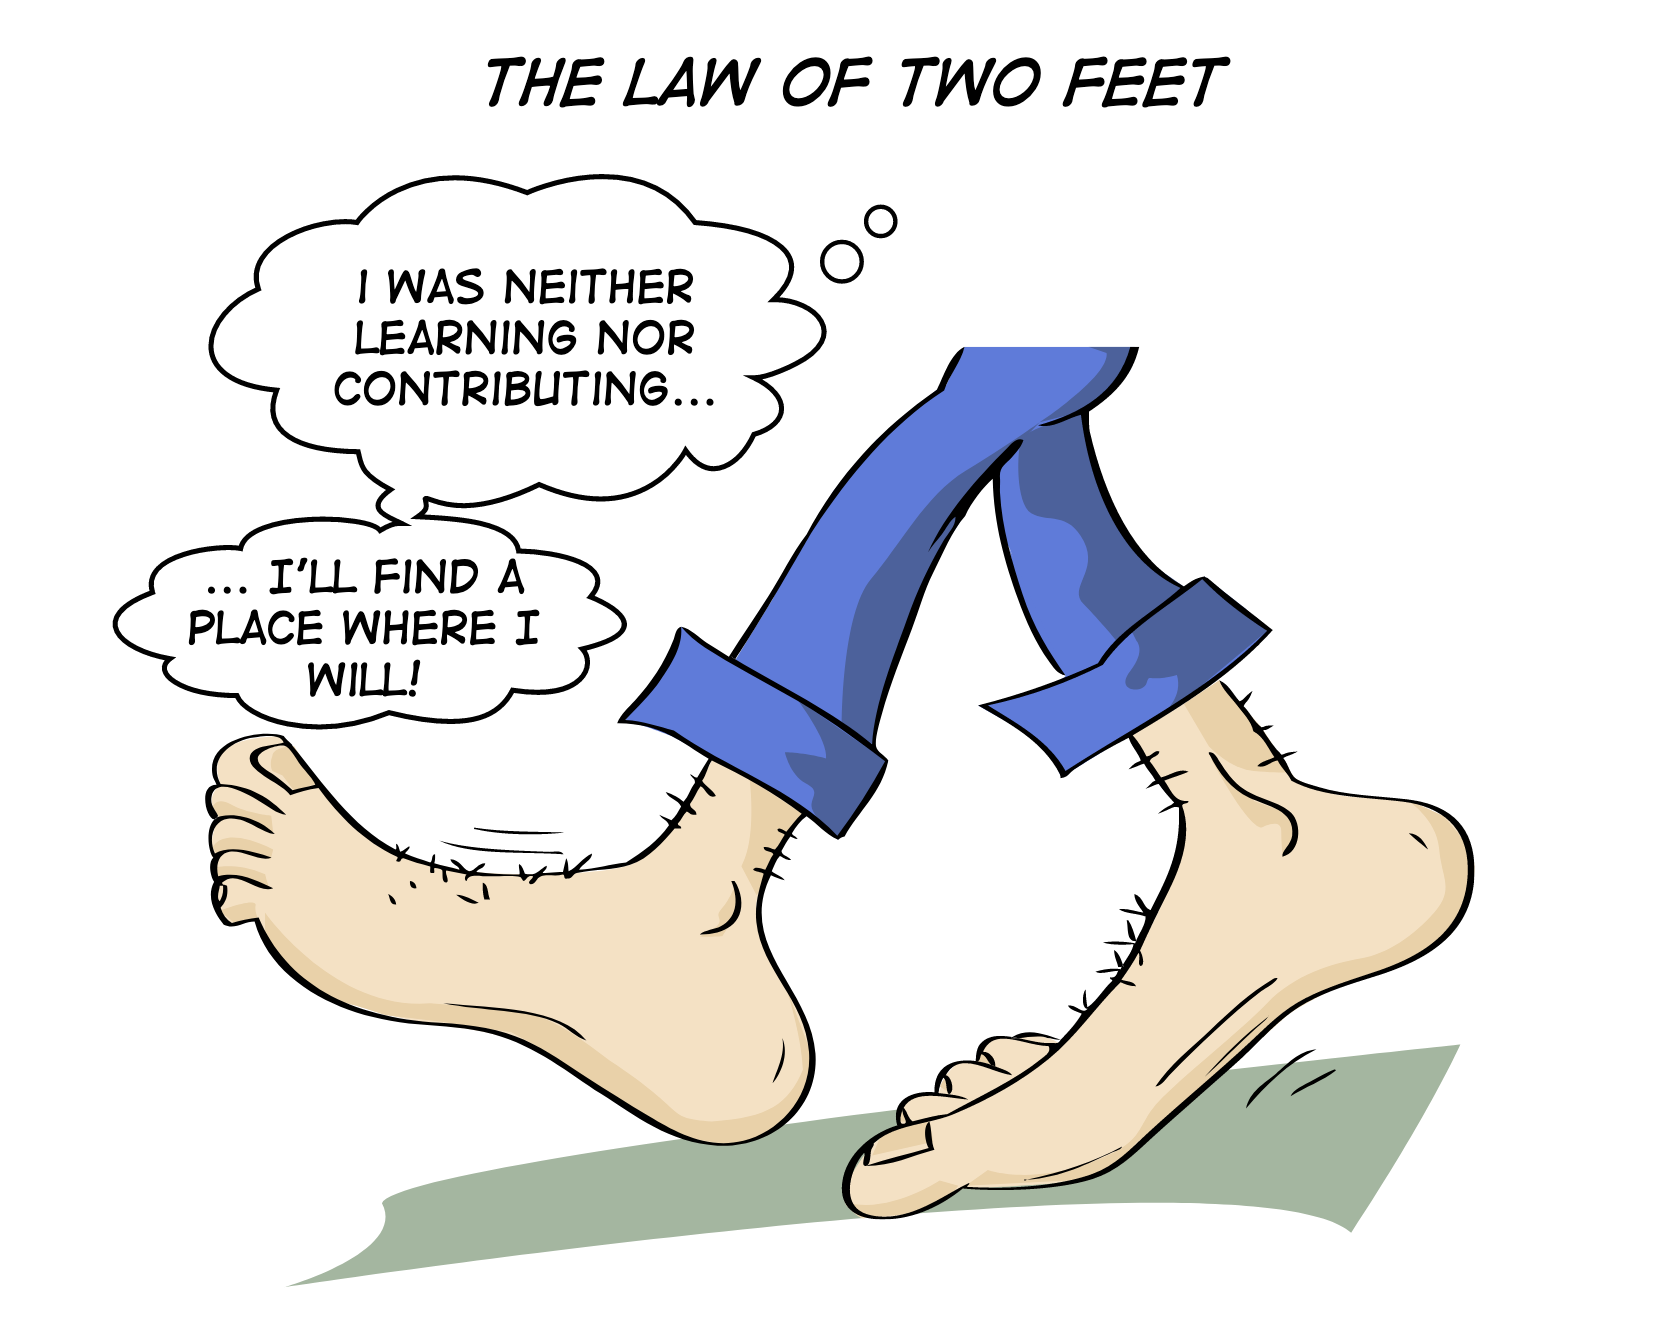 The law of two feet